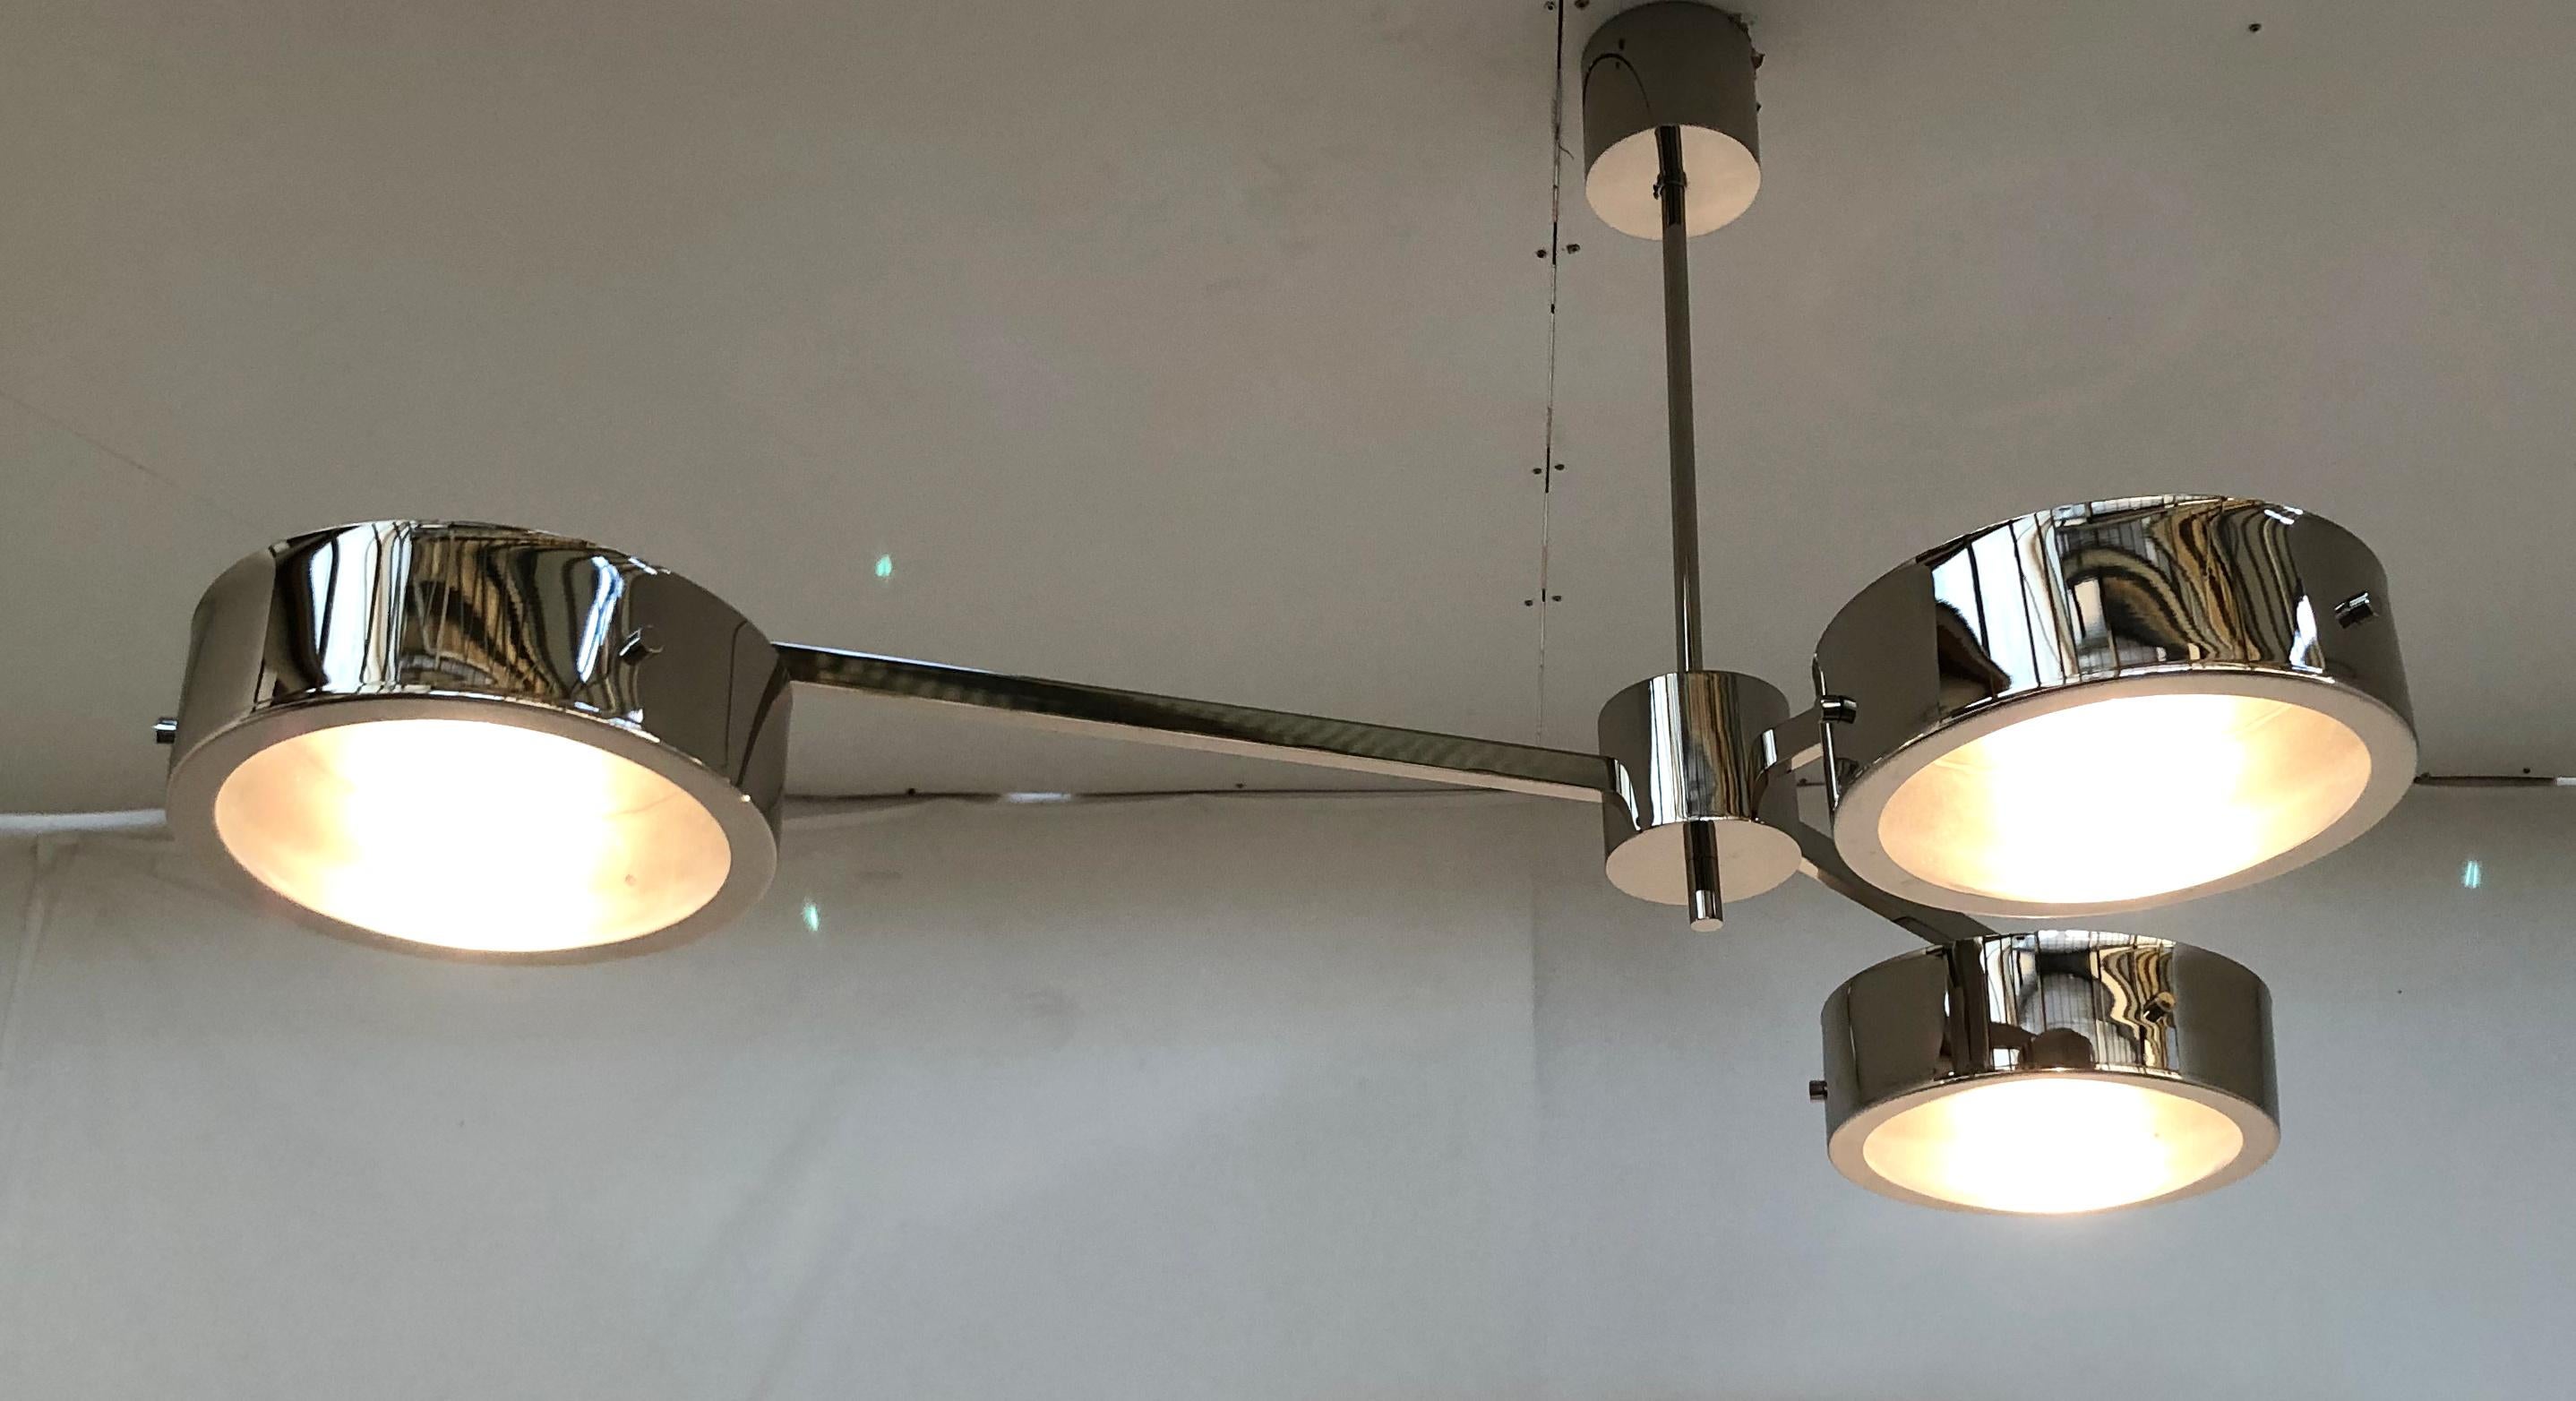 Italian modern pendant with three smoky Murano glass shades enclosed in chic polished nickel border bands and mounted on polished nickel frame 
Designed by Fabio Bergomi / Made in Italy
3 lights / E12 or E14 type / max 40W each
Measures: Length